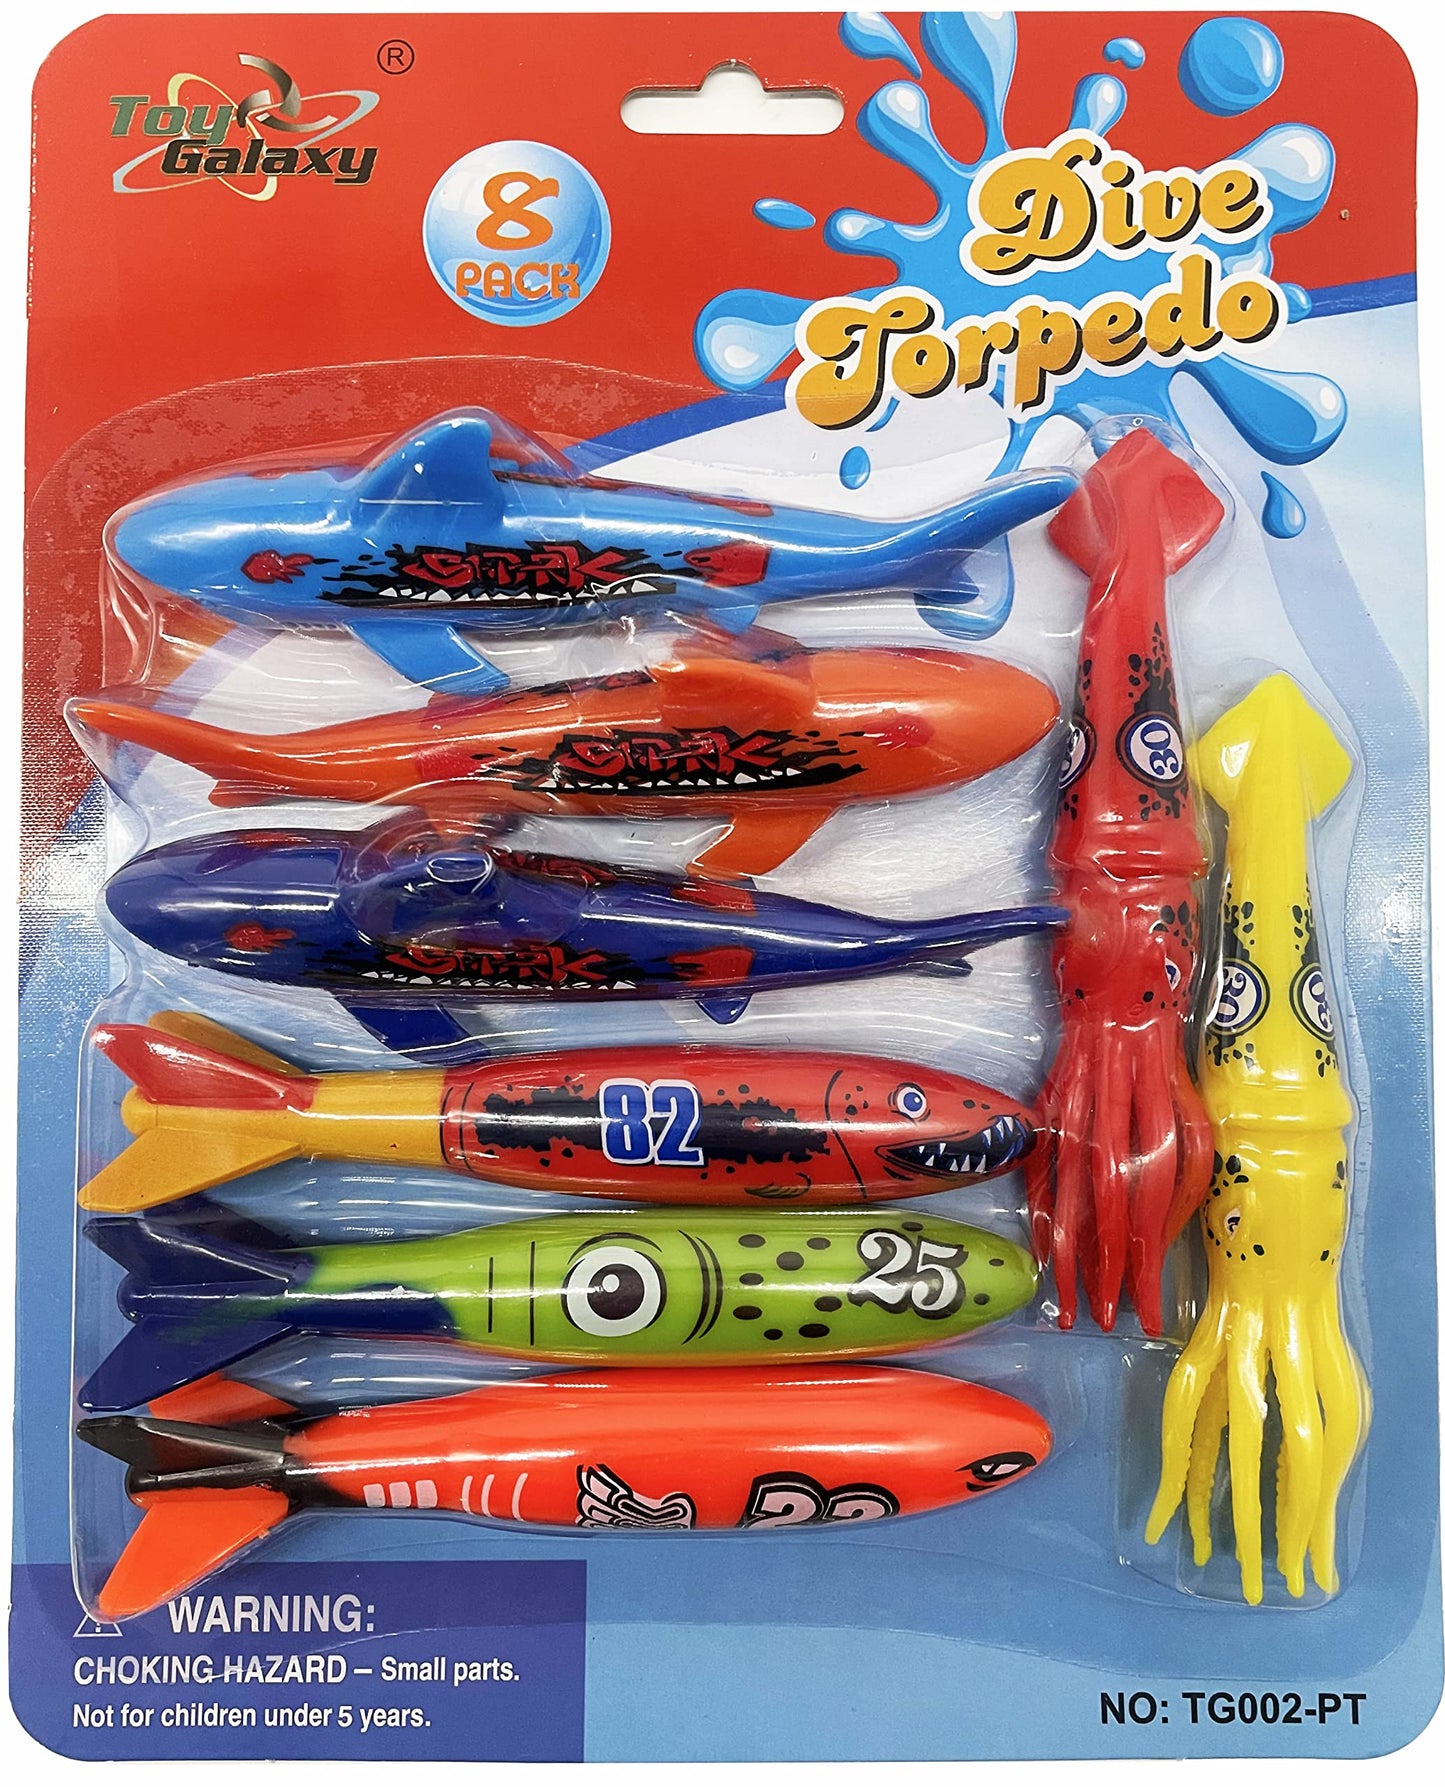 Pool Diving Toy Set for Kids, Practice Diving and Swimming, Underwater Sinking Torpedos, Sharks and Squids Multicolor Assorted